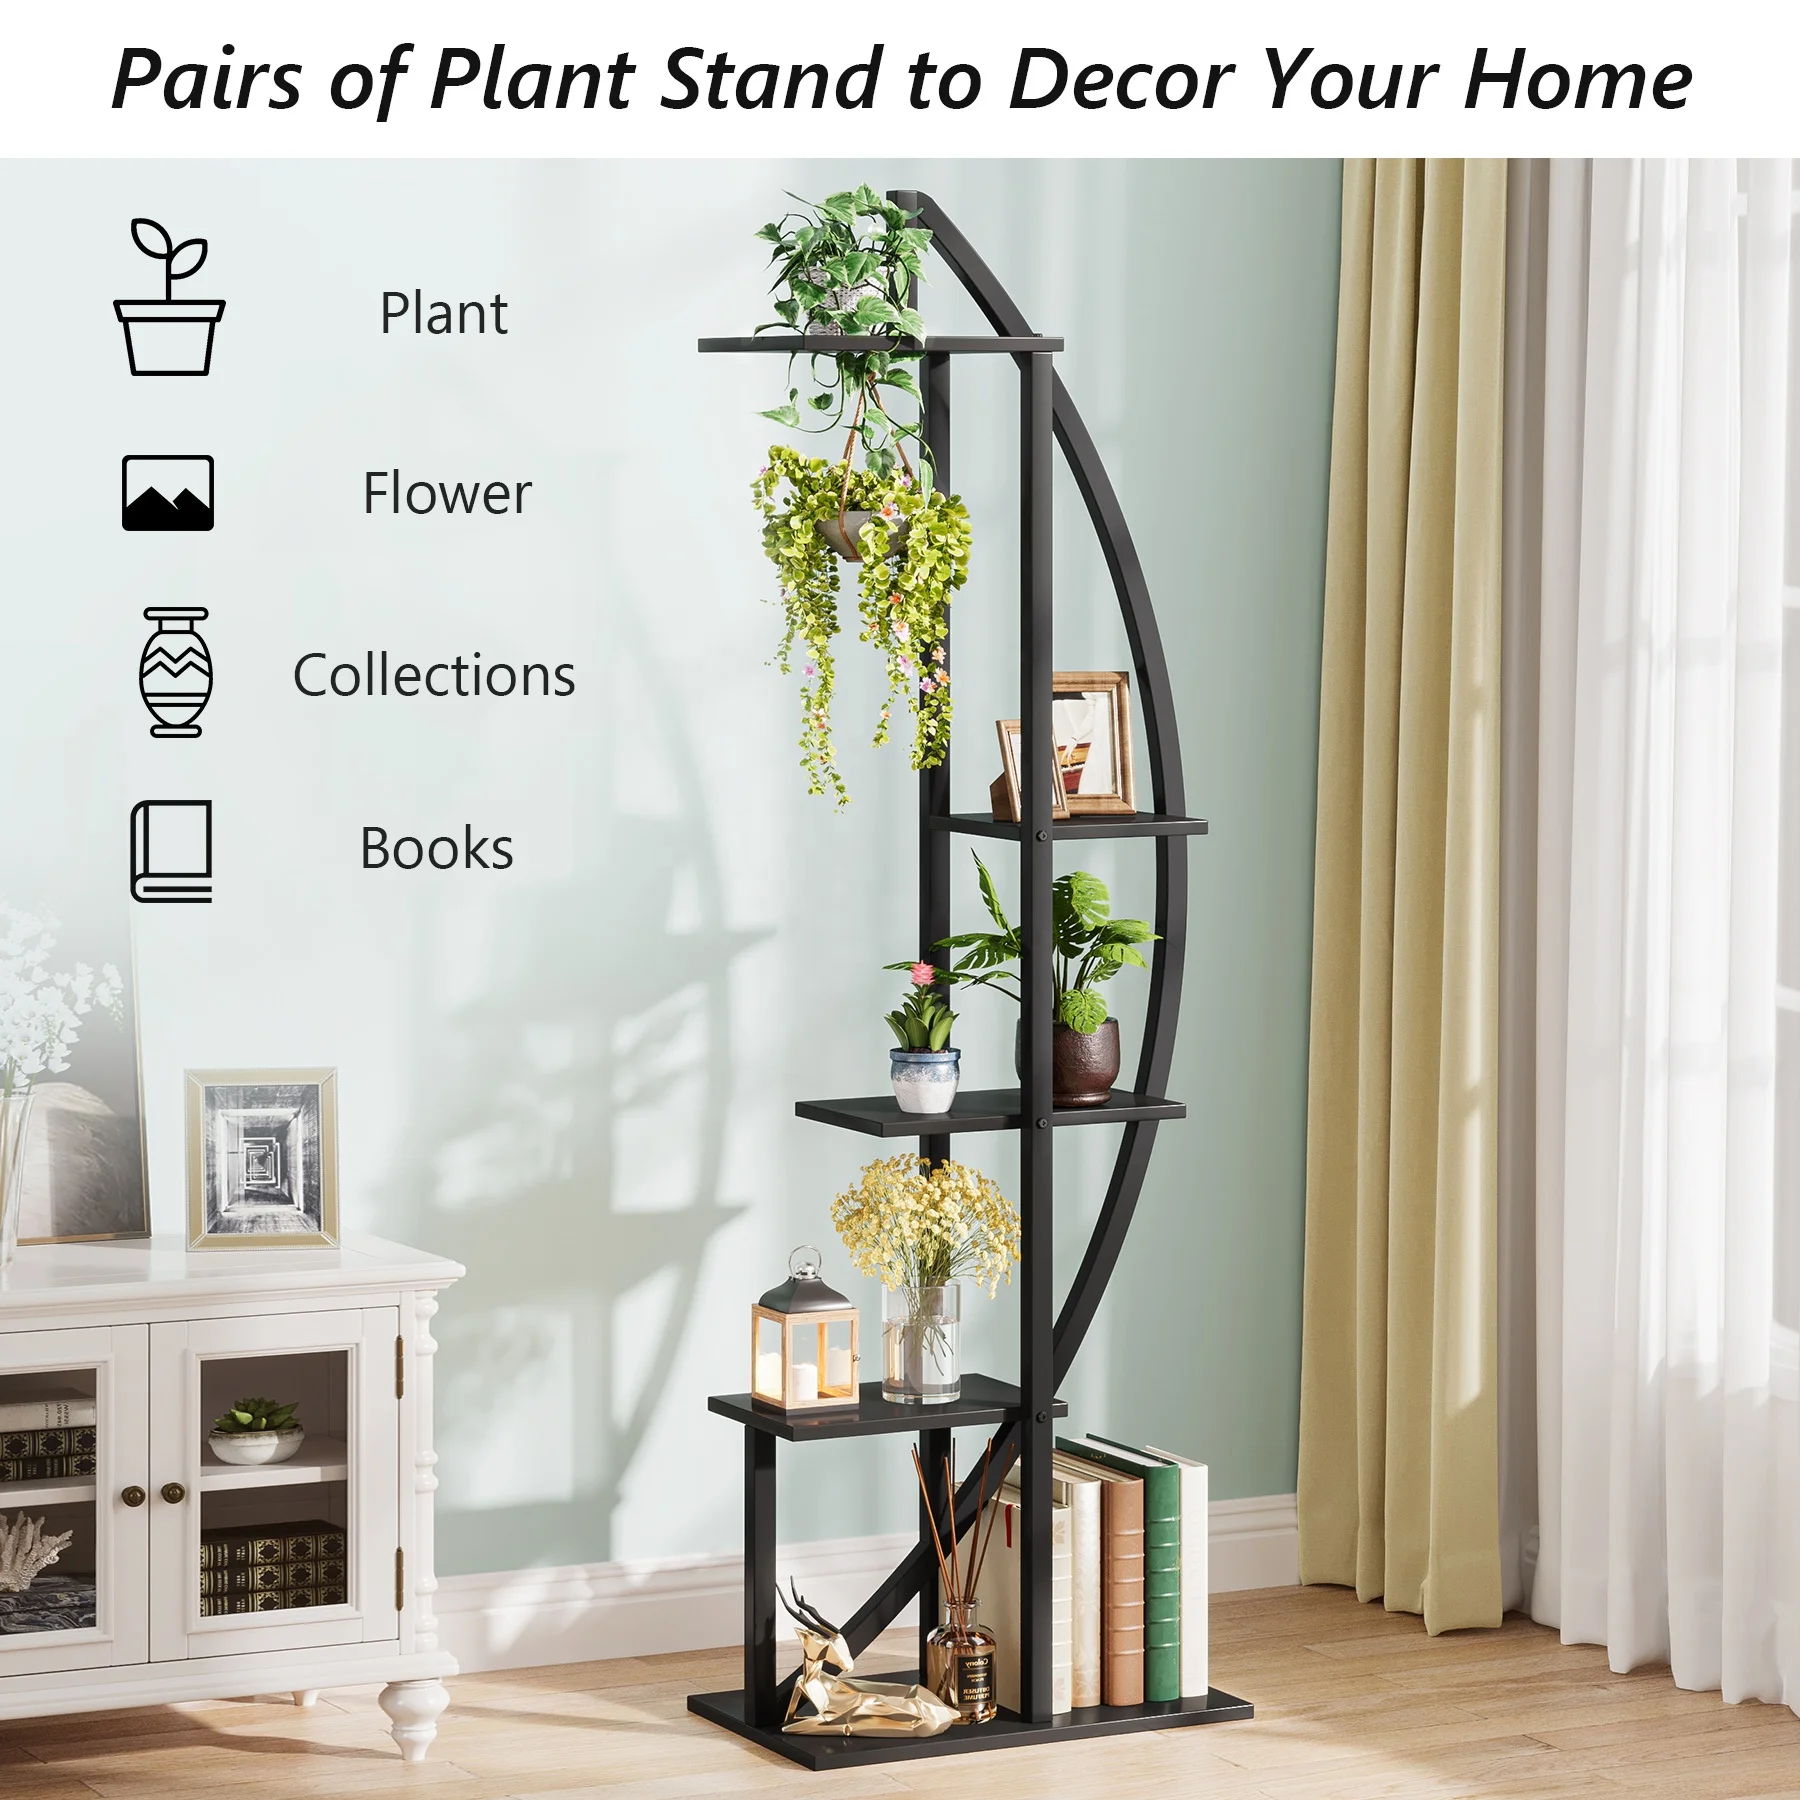 Tribesigns 5 Tier Plant Stand Pack of 2 Multi-Purpose Curved Display Shelf Bonsai Flower Plant Stand Rack for Indoor Garden